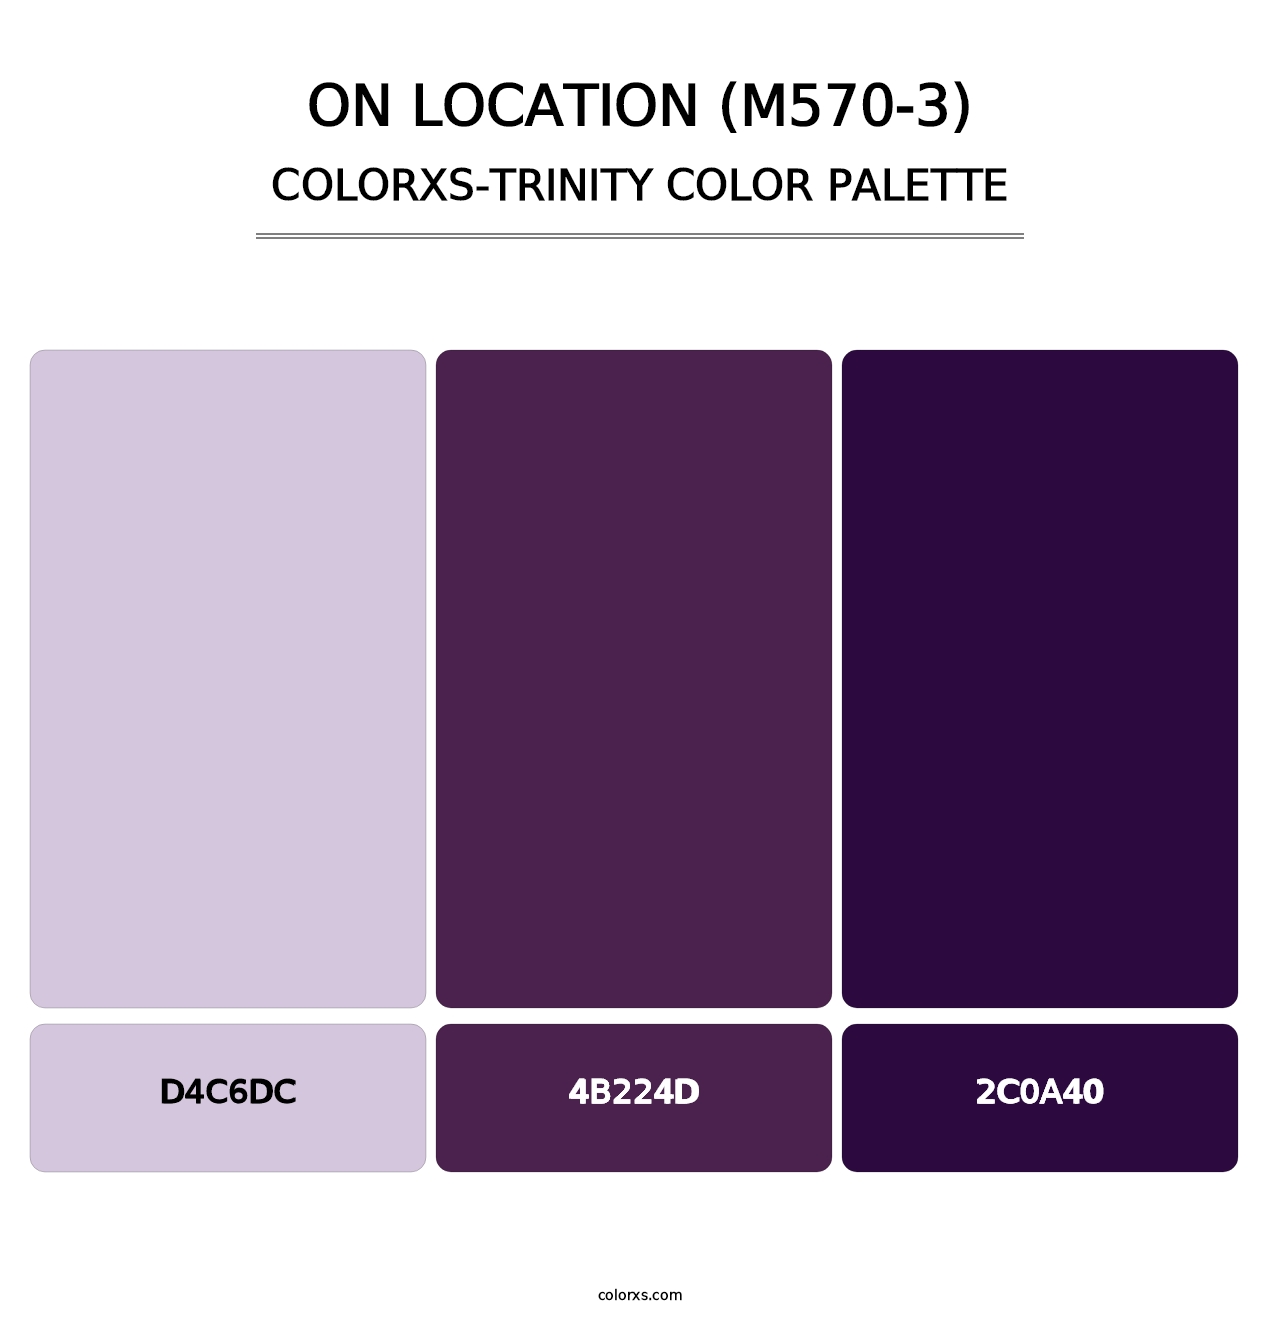 On Location (M570-3) - Colorxs Trinity Palette